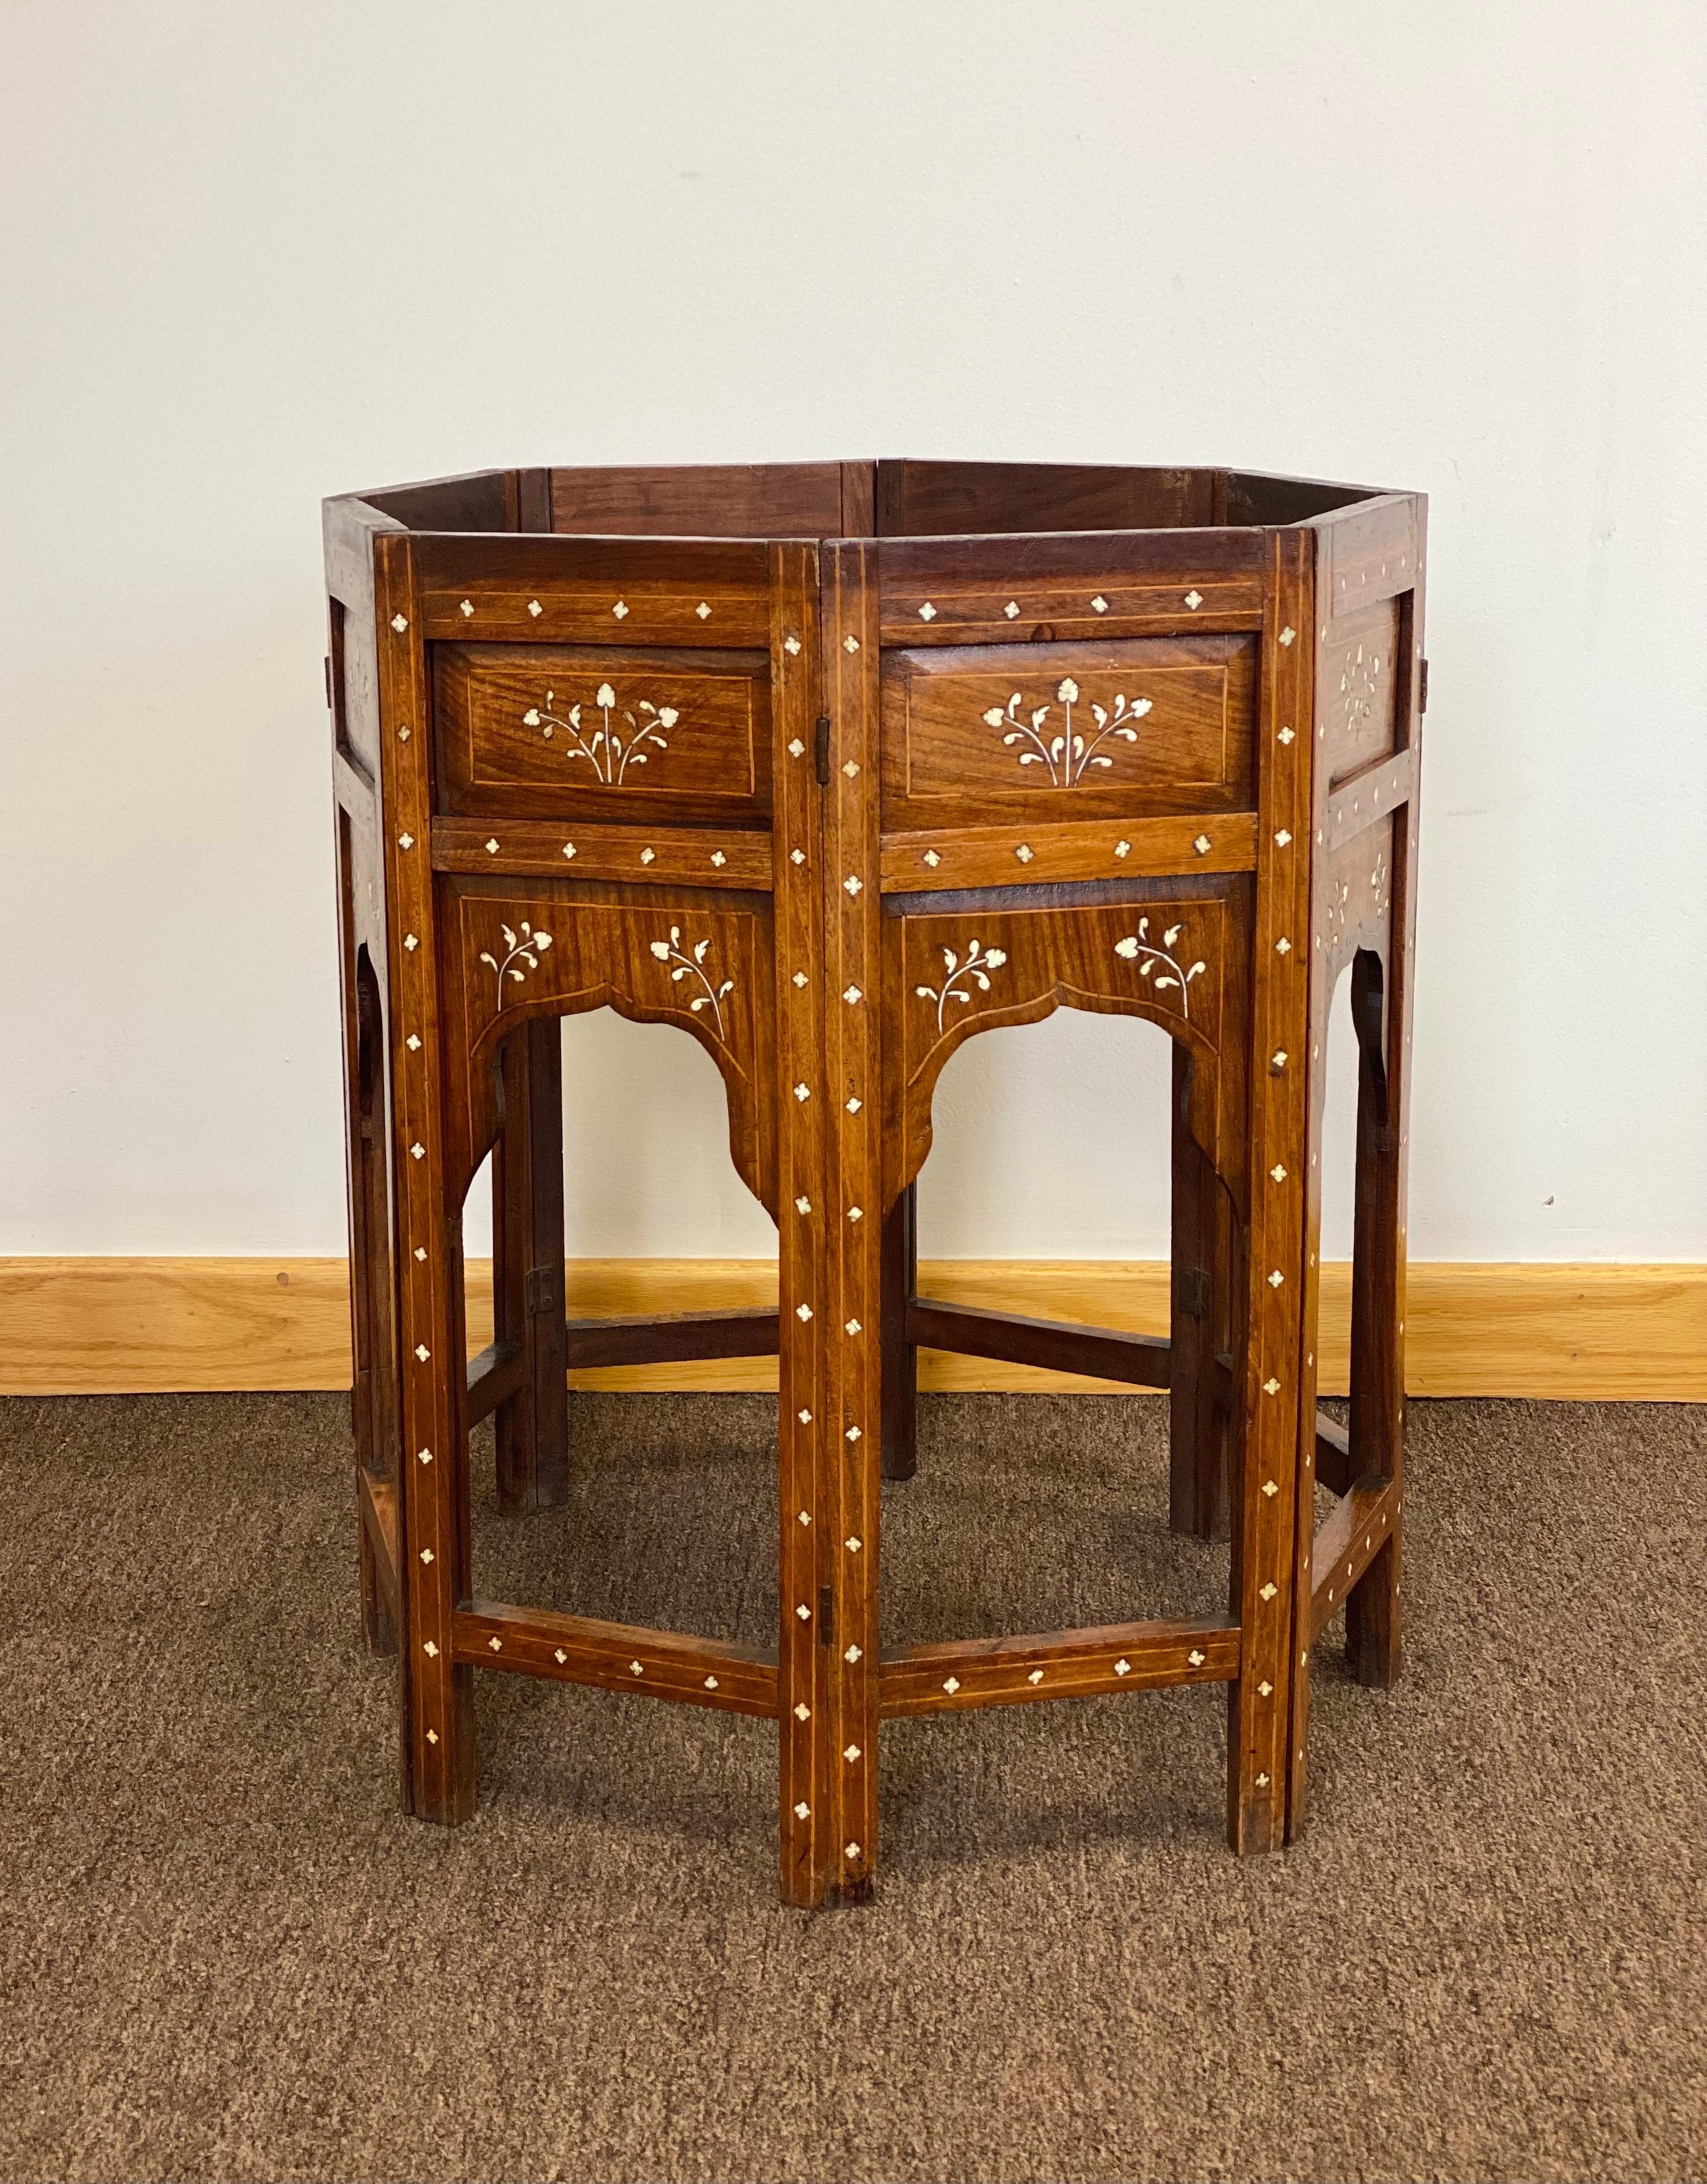 We are very pleased to offer a beautiful side tea table, circa the 1950s. Handcrafted from solid wood, this gorgeous piece showcases an intricate bone inlaid that displays a beautiful visual contrast. The folding base showcases eight arched panels